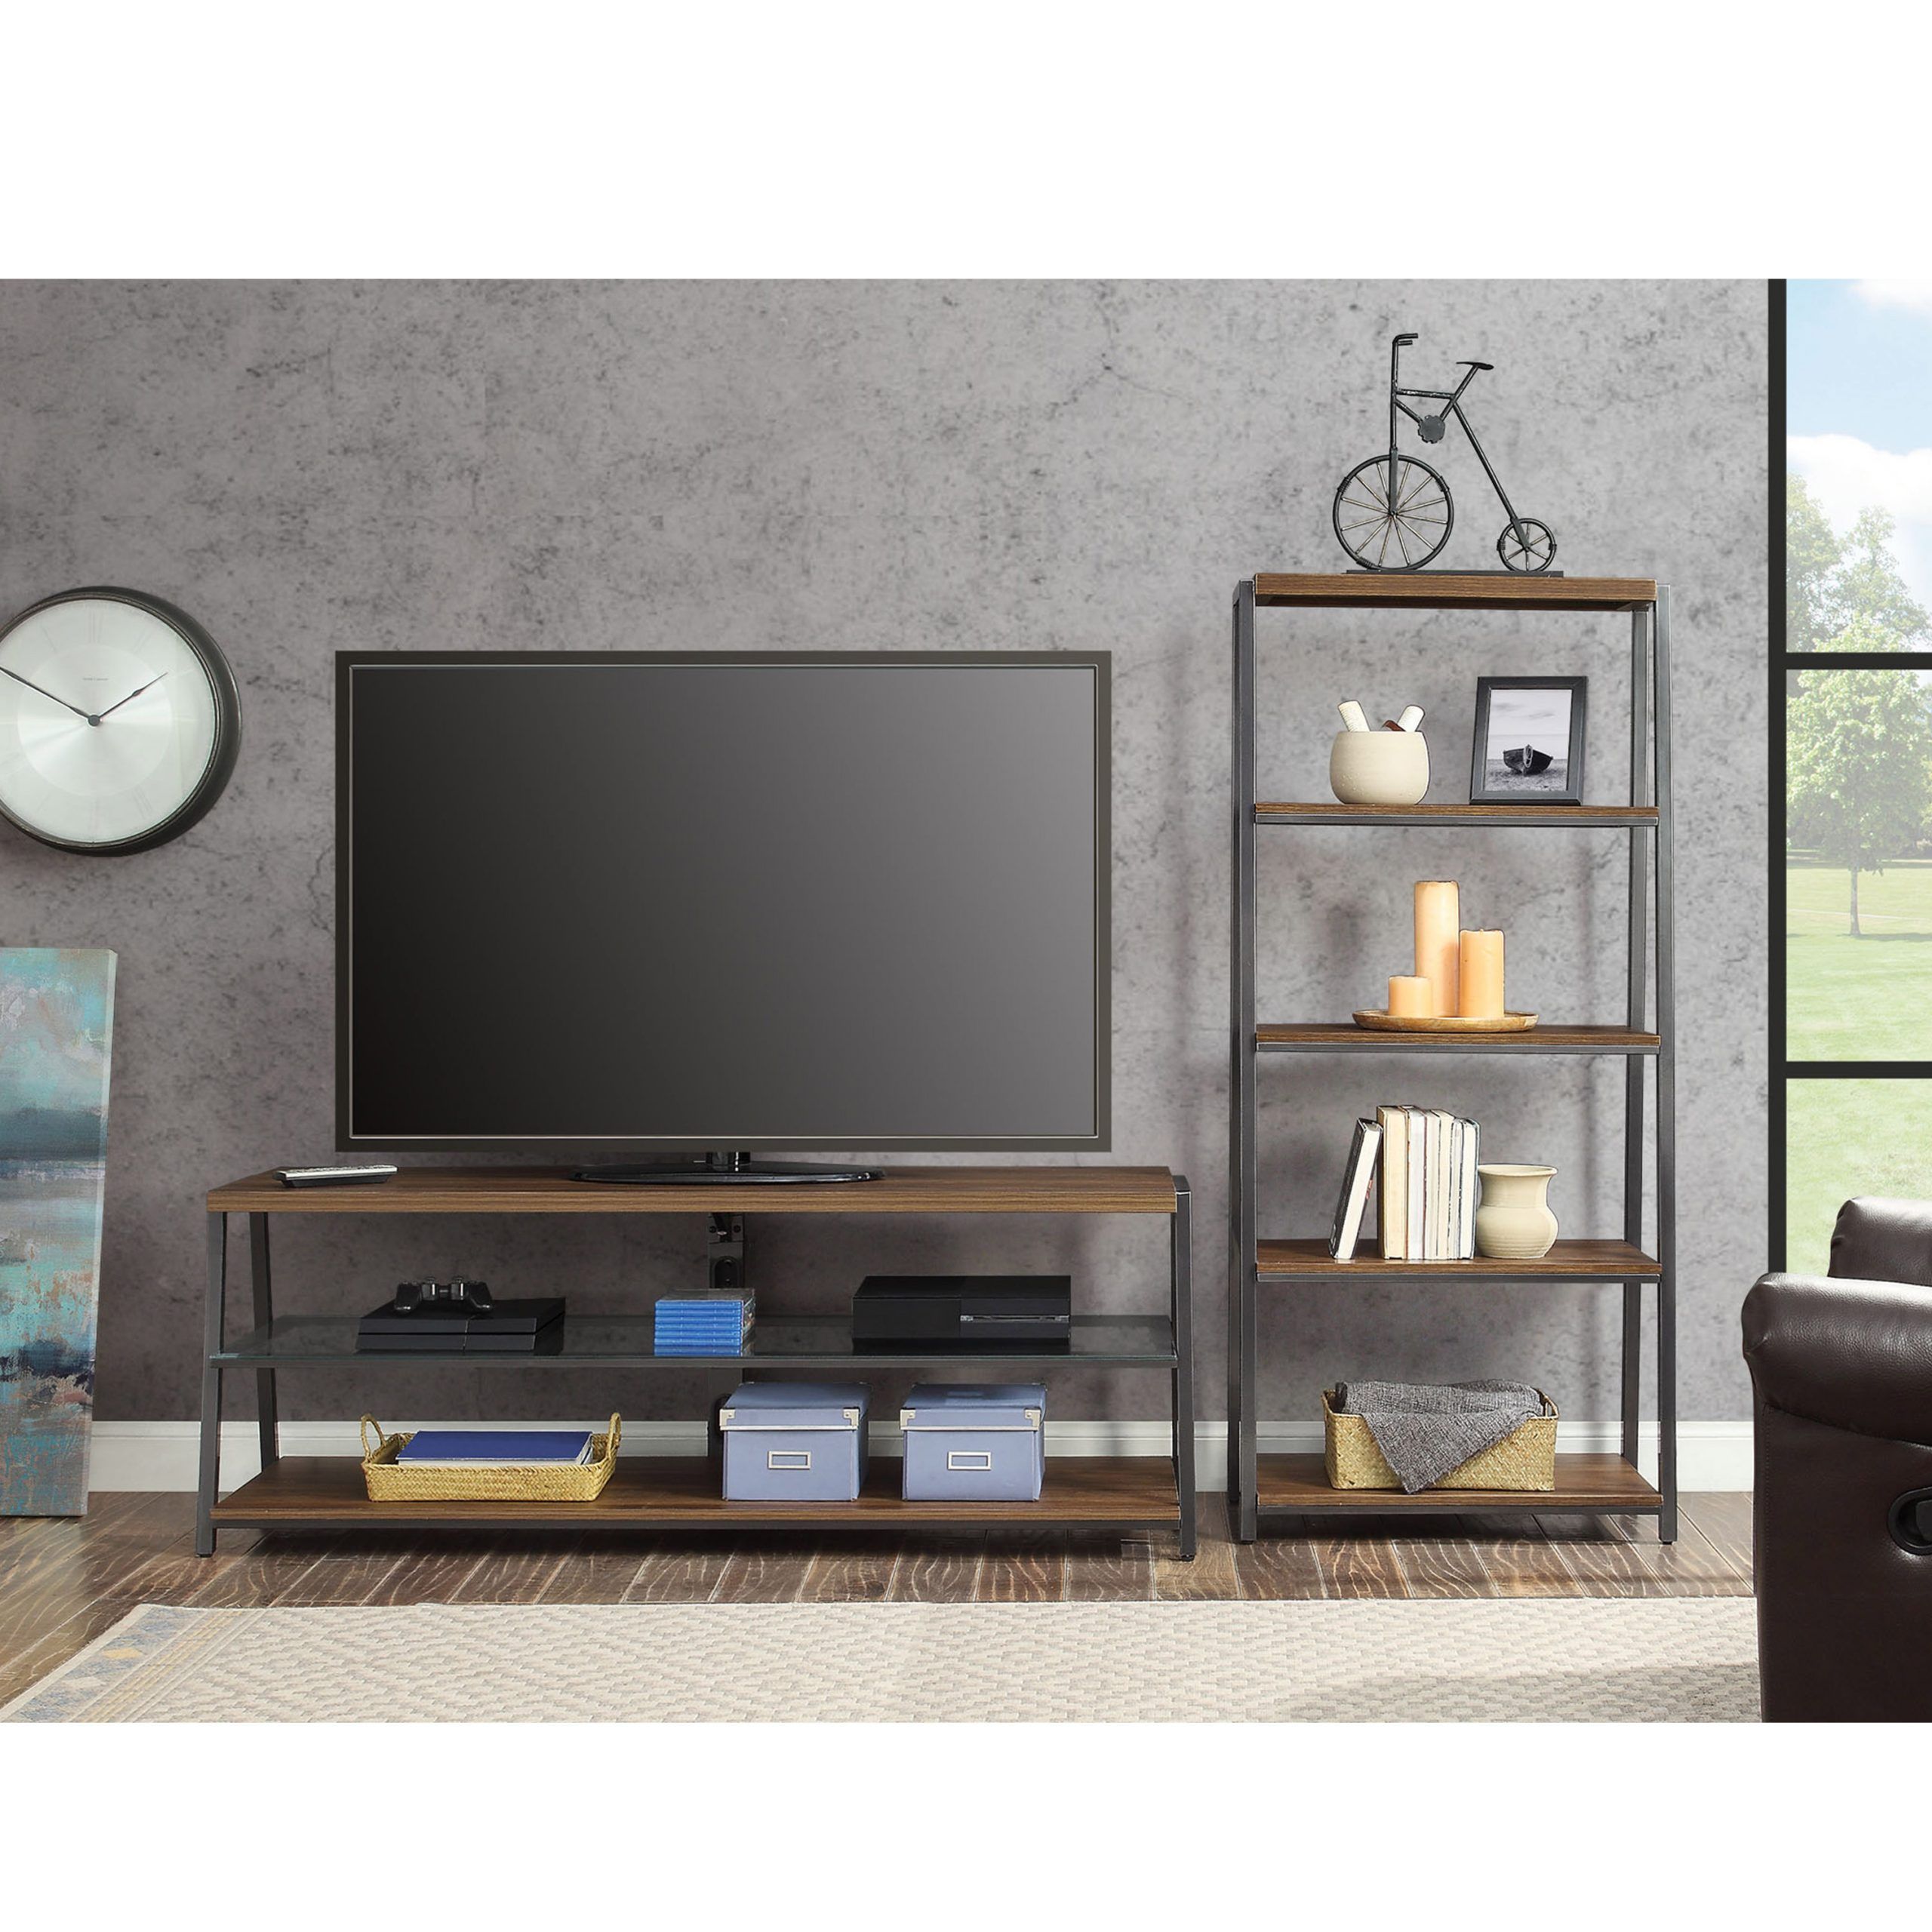 Mainstays Arris 3 In 1 Tv Stand And 4 Shelf Tower Book With Regard To Current Mainstays Arris 3 In 1 Tv Stands In Canyon Walnut Finish (Photo 1 of 10)